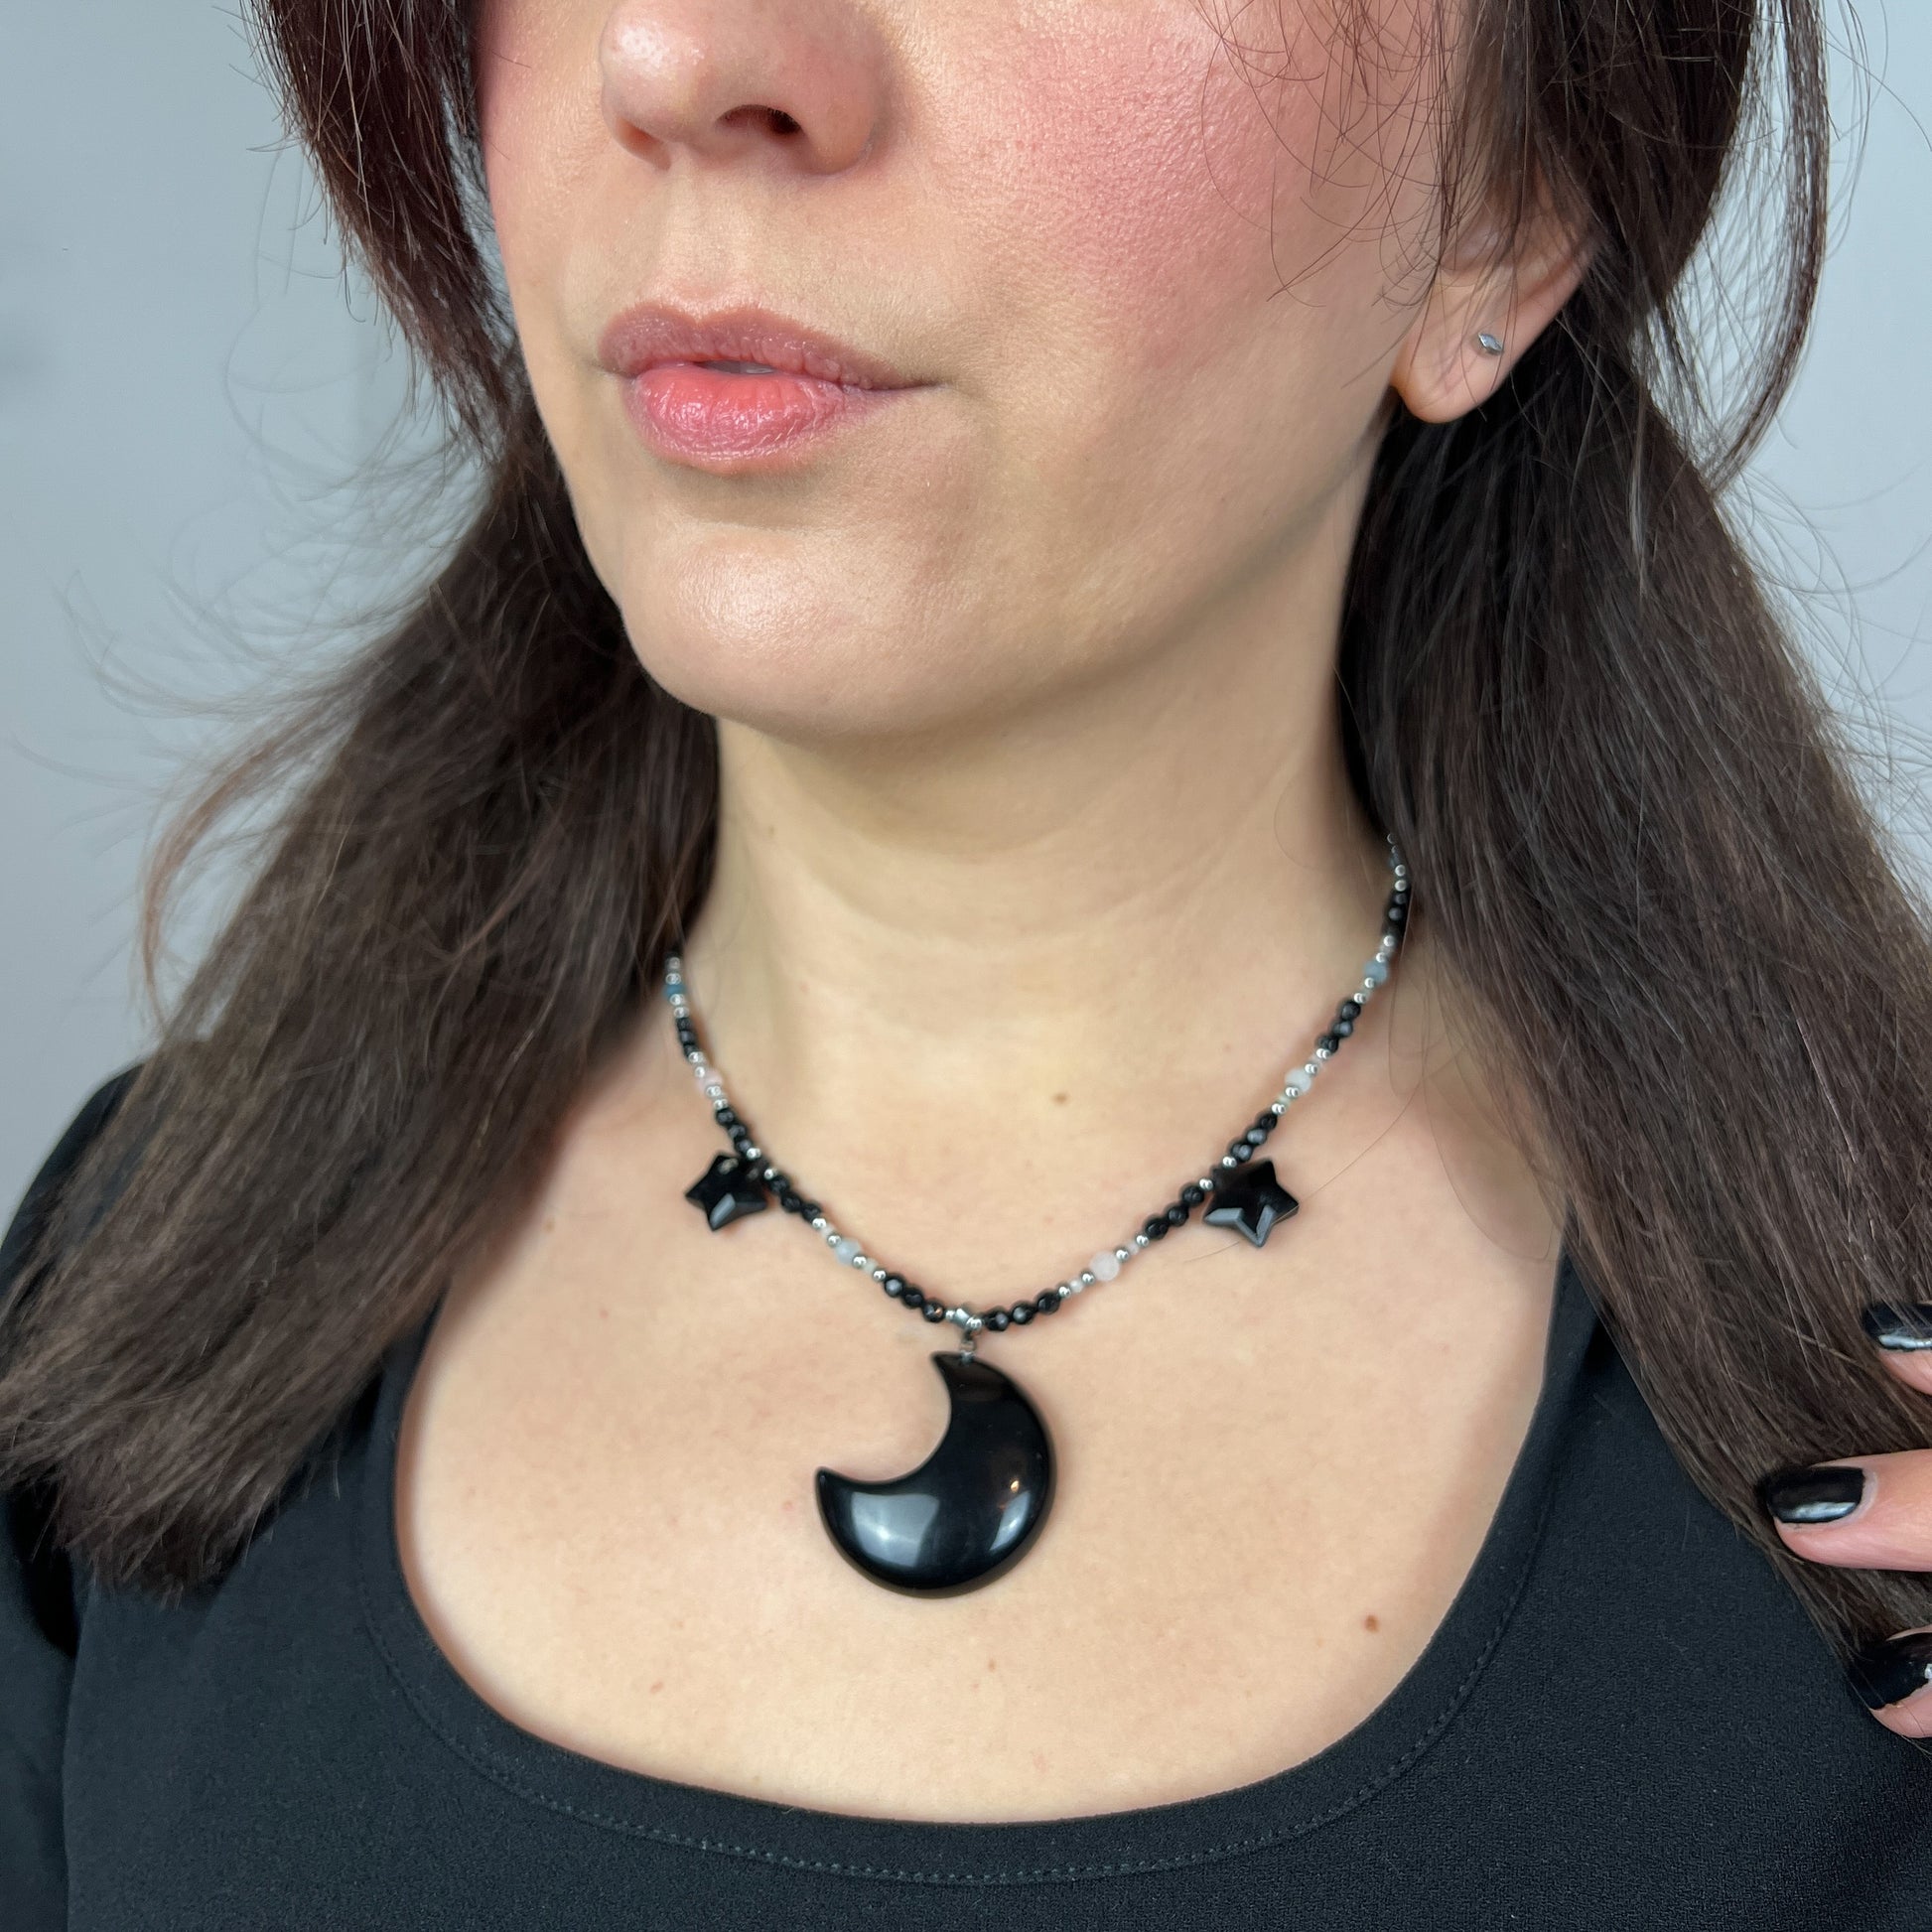 Gemstone moon and stars necklace obsidian morganite onyx and stainless steel beaded necklace Rêveries Collection gift for her